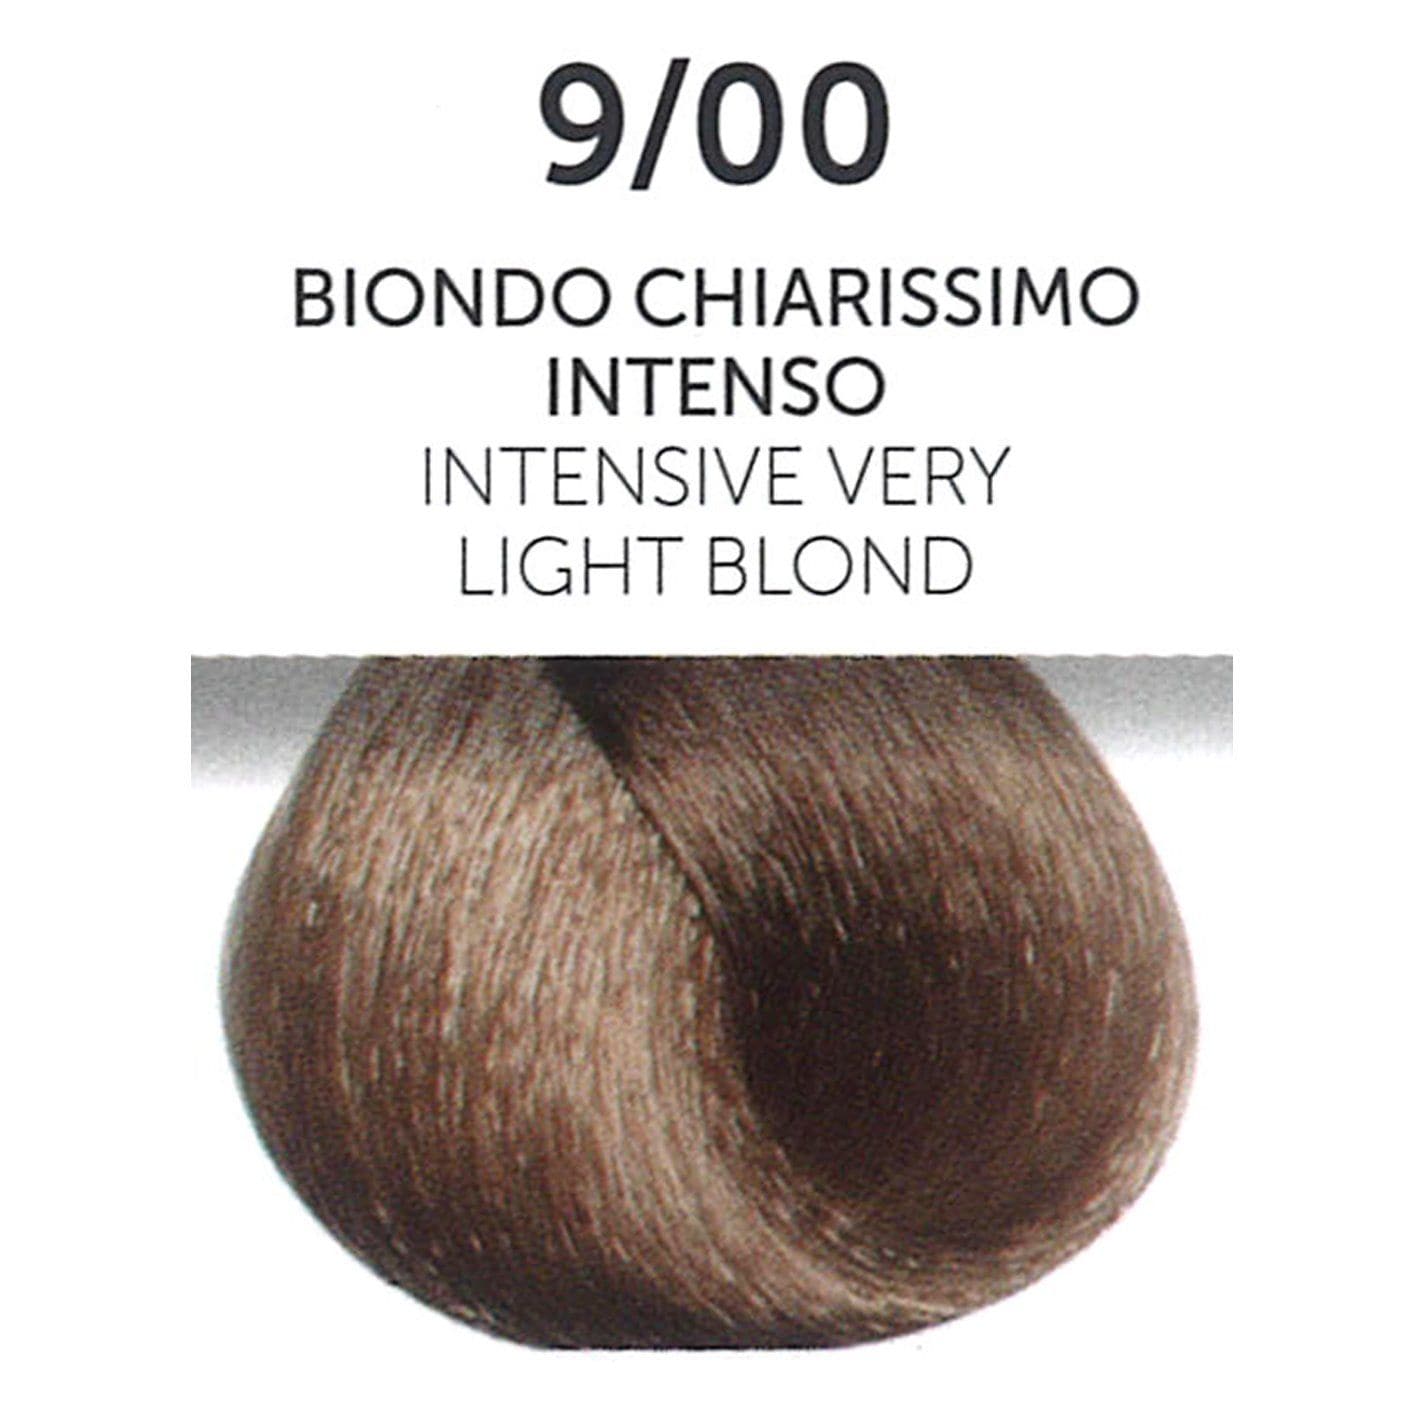 9/00 Intensive Very Light Blond | Permanent Hair Color | Perlacolor | OYSTER - SH Salons